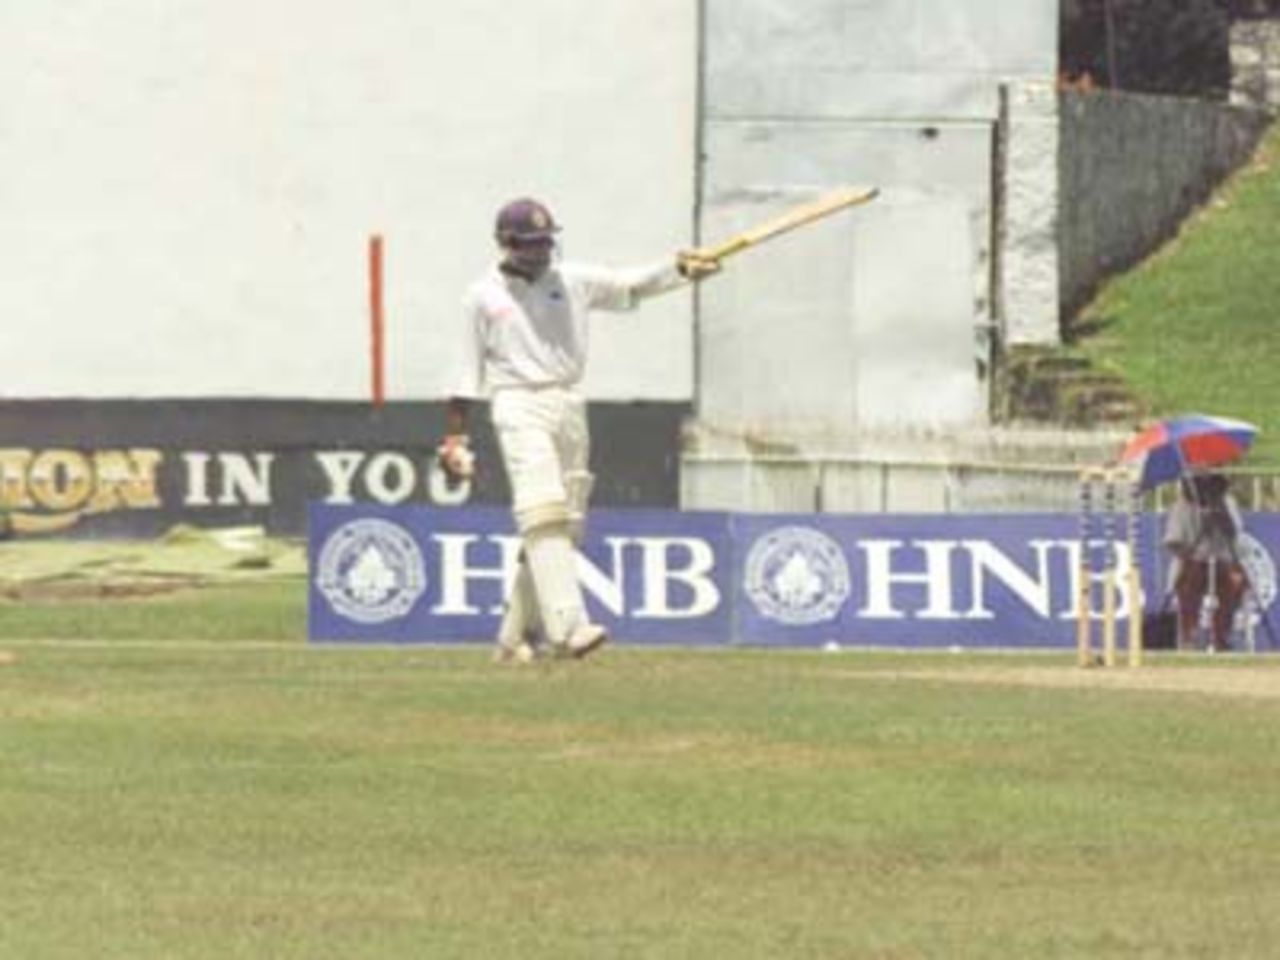 Mahela celebrates a much needed half century on the second day of the First Test, 15 June, 2000. Pakistan in Sri Lanka, Sinhalese Sports Club Ground, Colombo, 14-18 June 2000